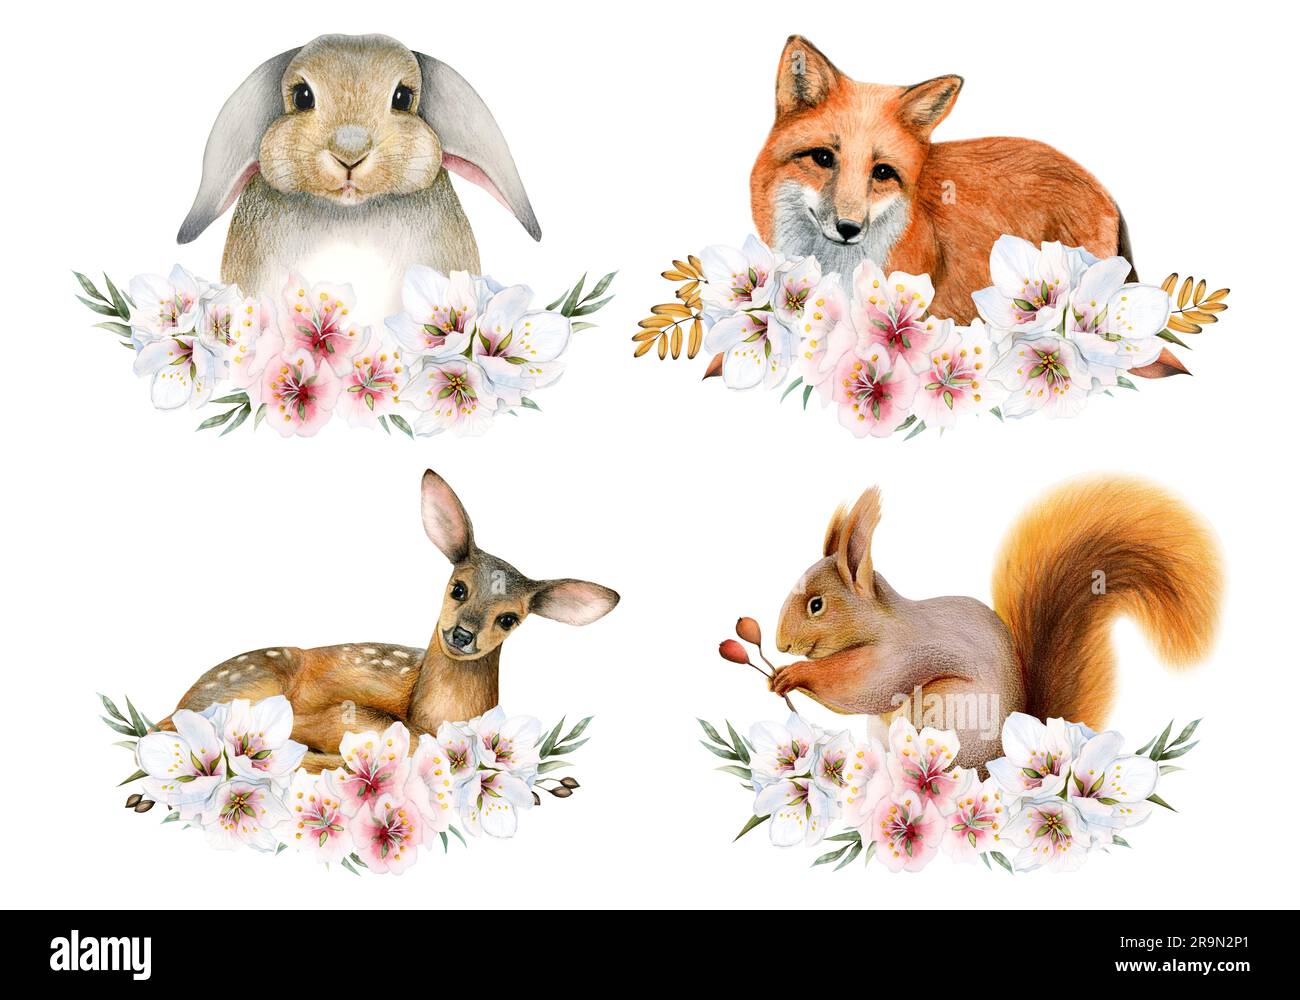 Cute forest animals in pink flowers wreath watercolor illustration set. Woodland fox, bunny rabbit, squirrel baby deer Stock Photo